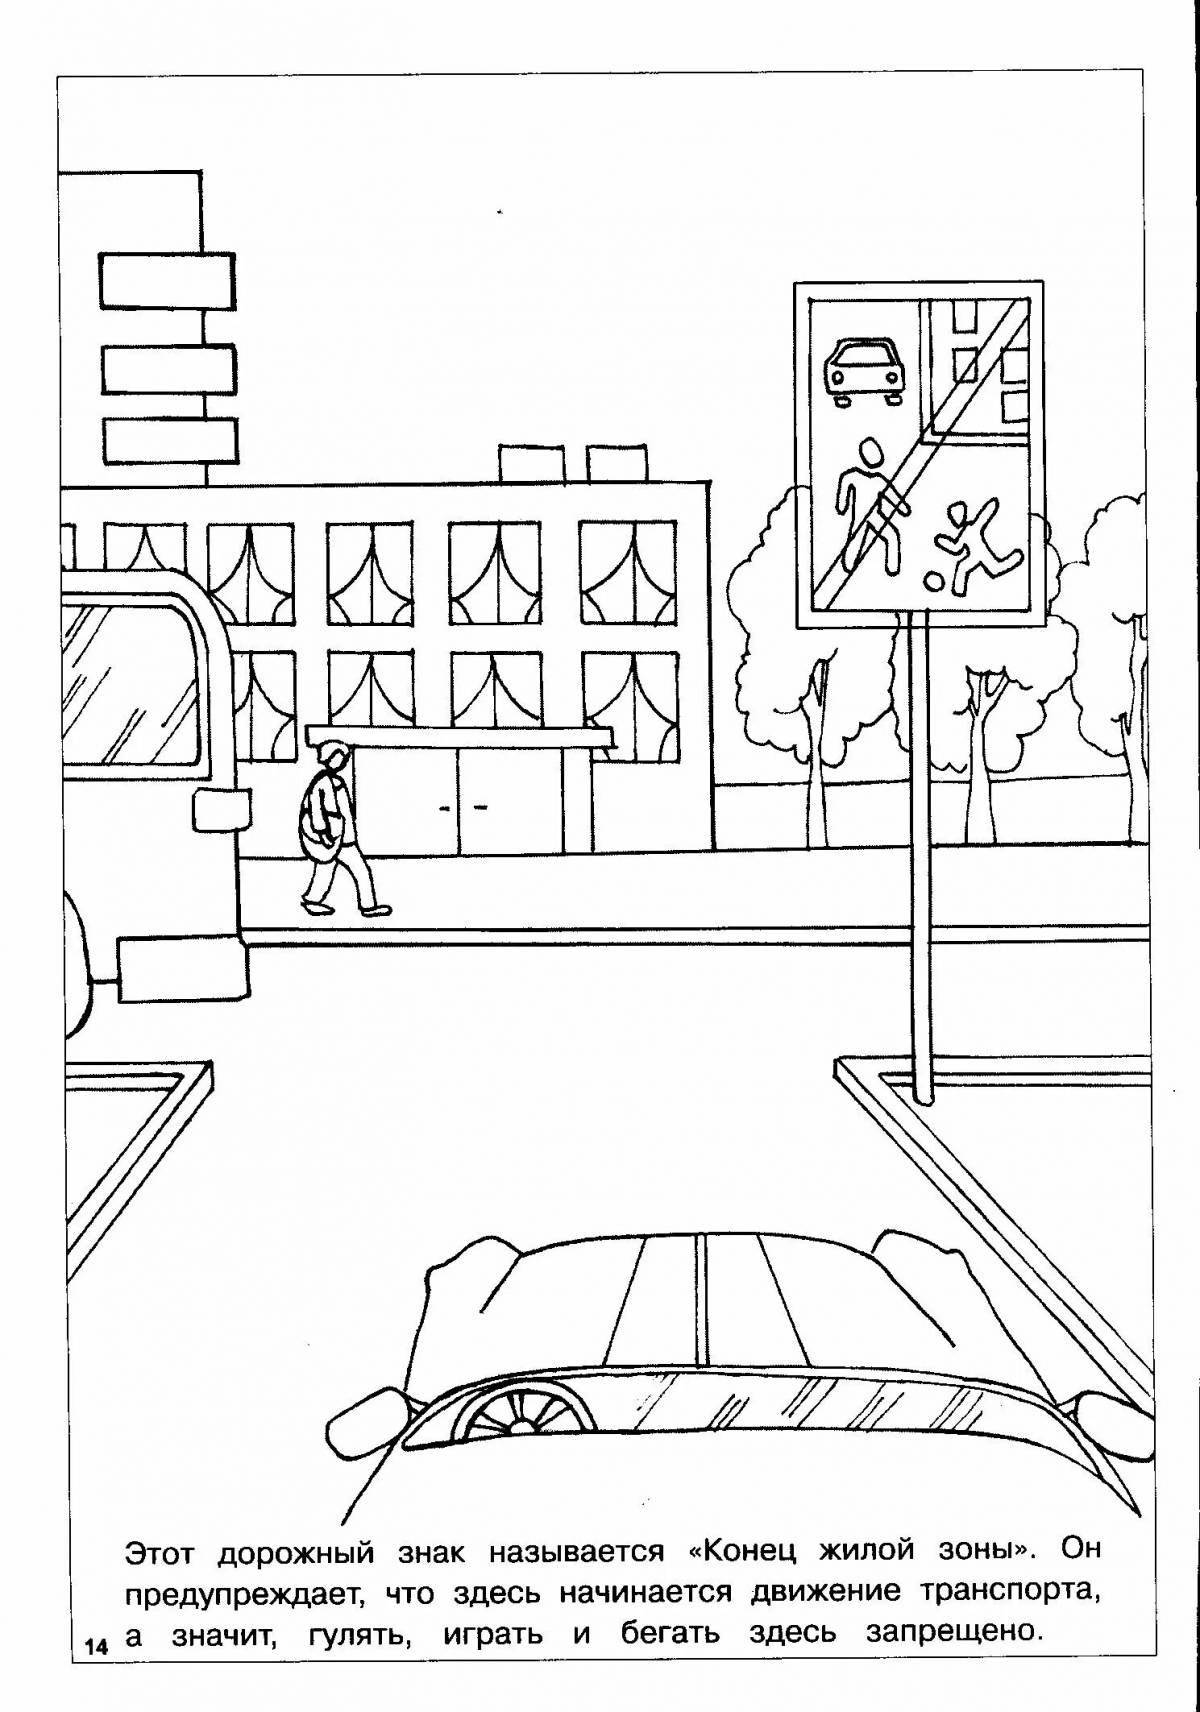 Adorable Home Road Coloring Page